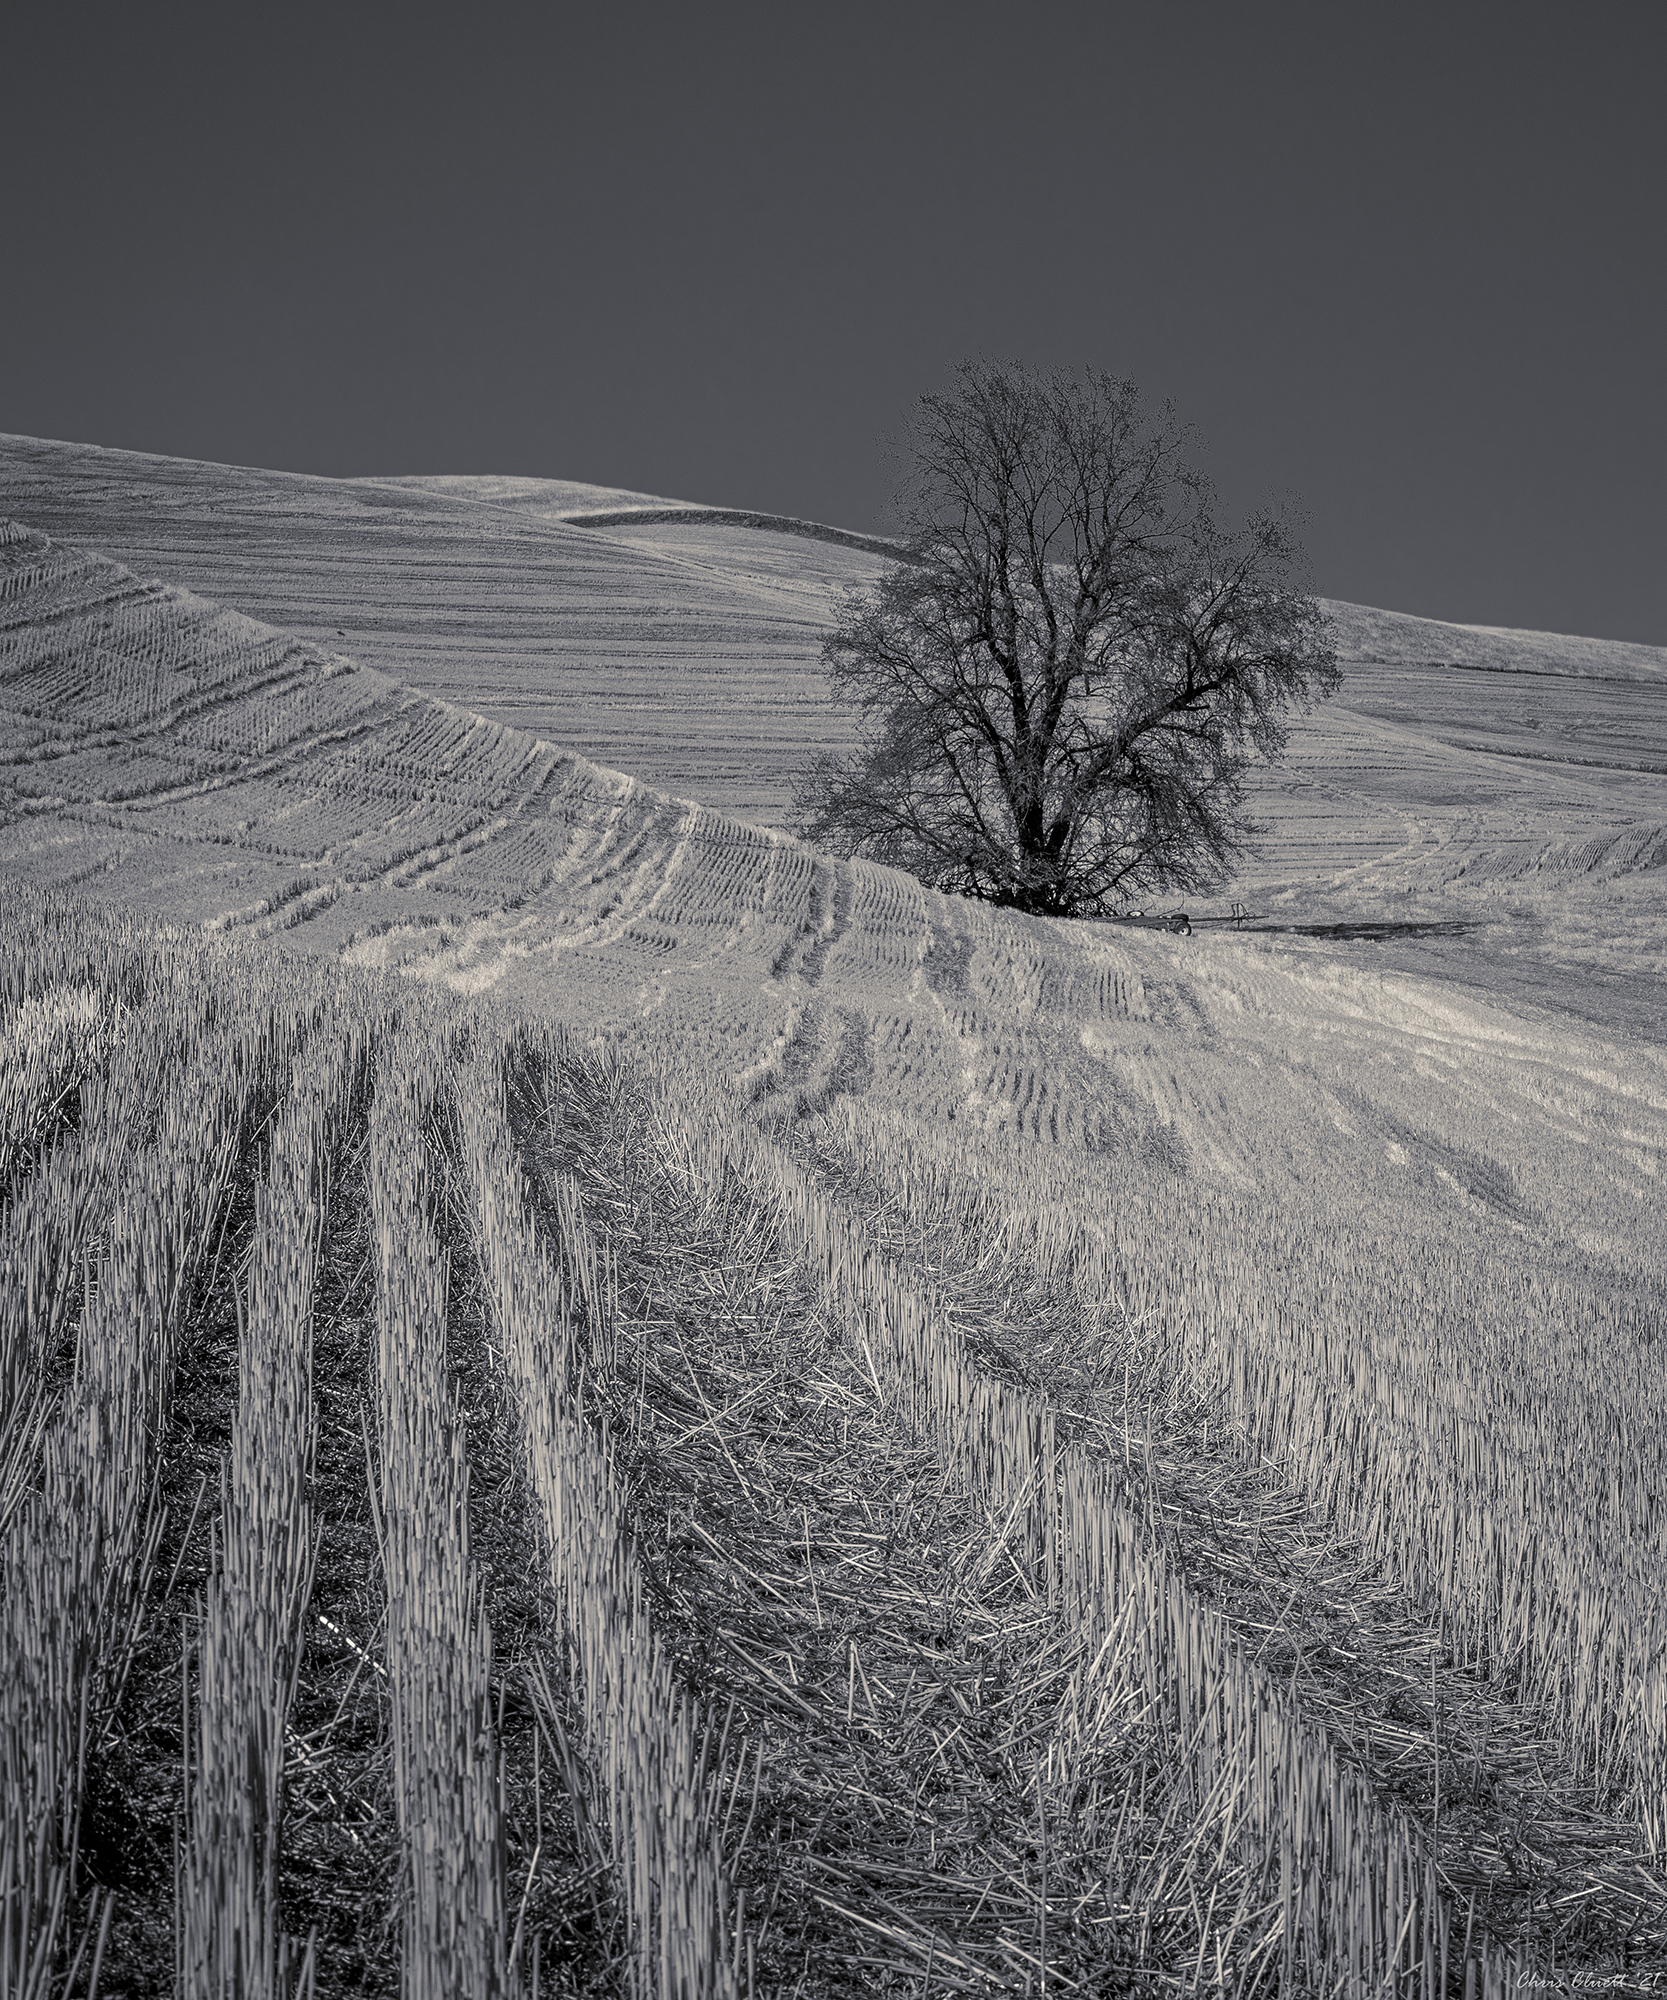 Strong lines in black and white offer a stark representation of this early period in the overall lifecycle of the agriculture of the Palouse.